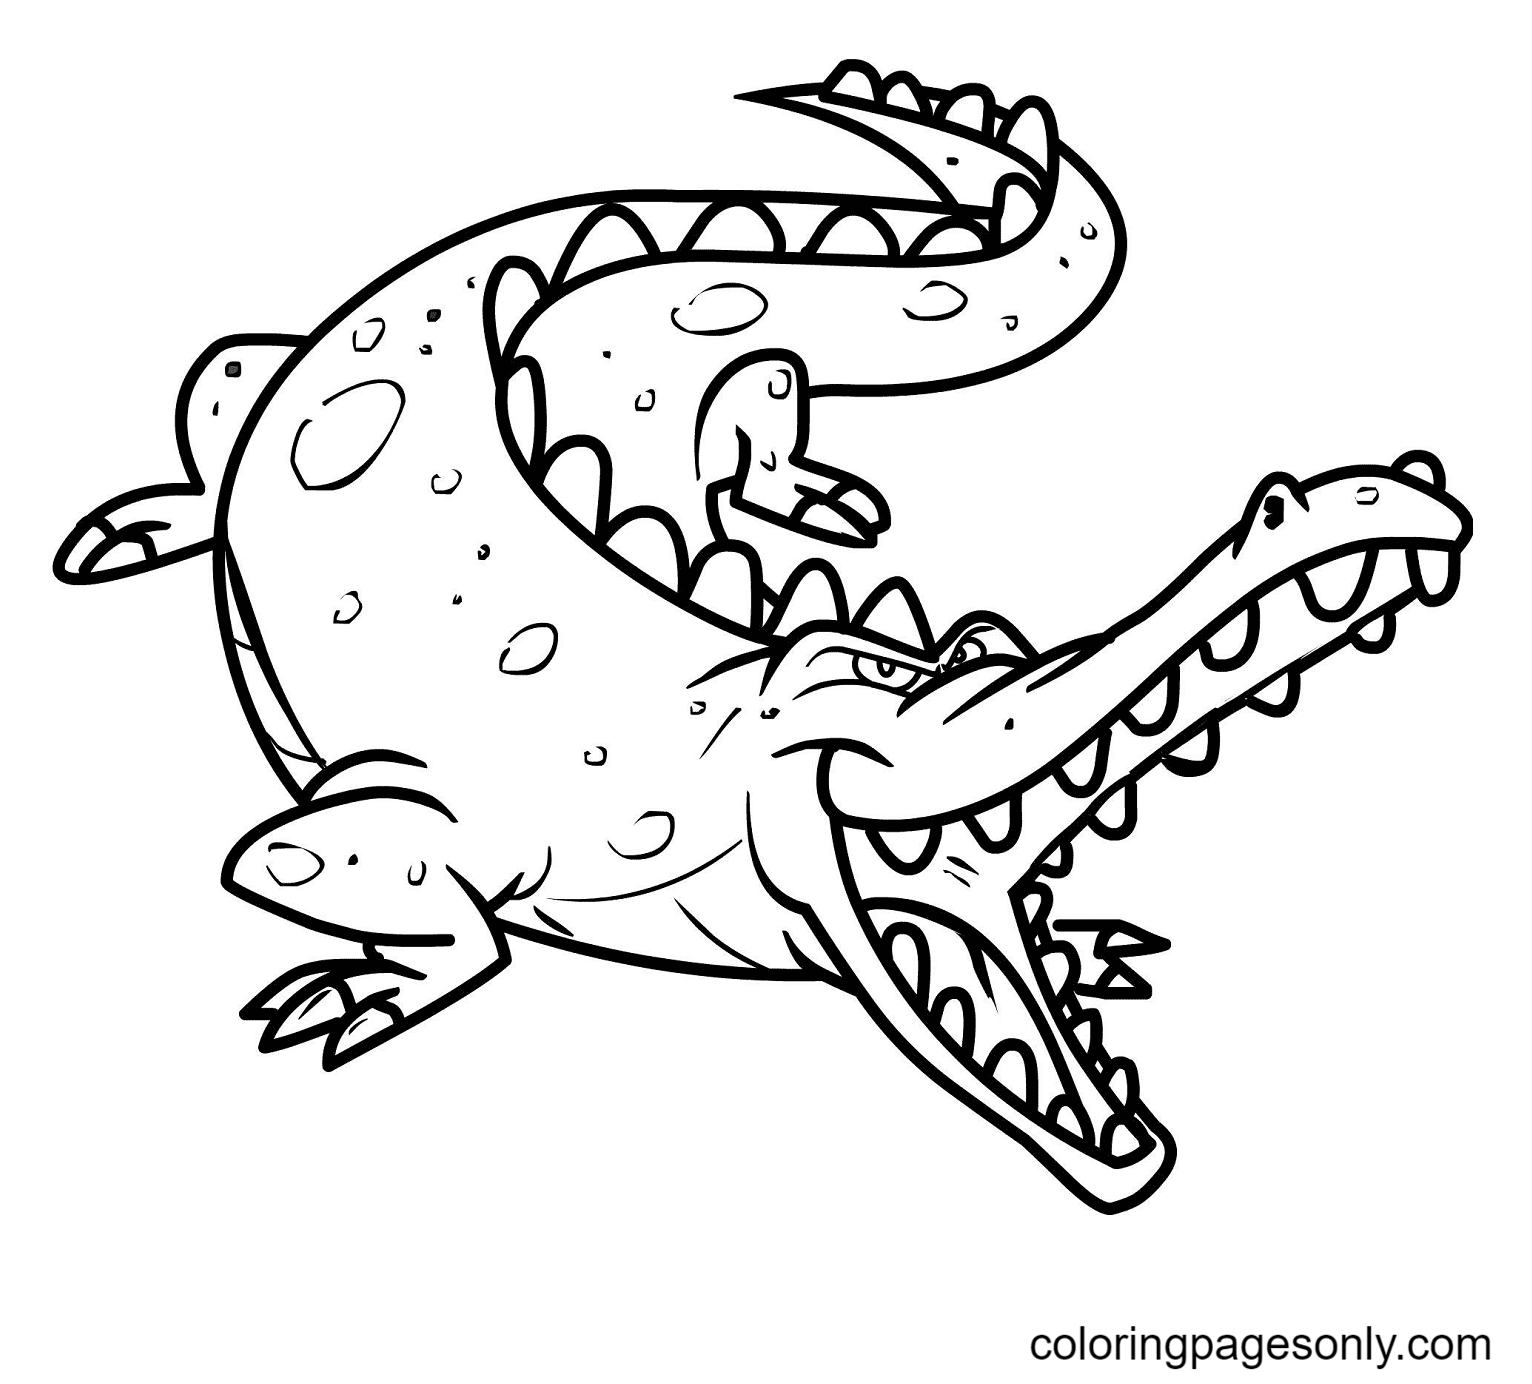 Crocodile for Kids Coloring Pages